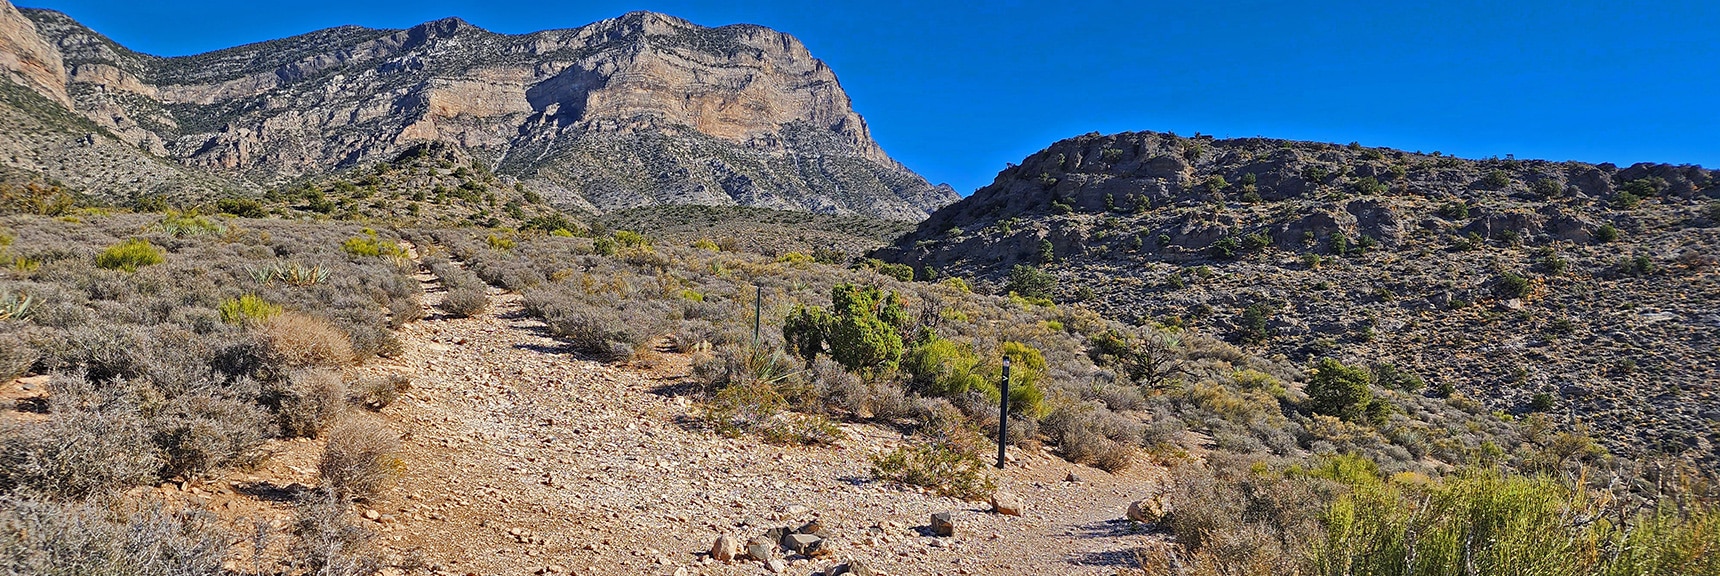 In About a Mile, Take the Old Road to the Left Toward the Saddle | Kyle Canyon Grand Crossing | Southern Half | Red Rock Canyon National Conservation Area, Nevada